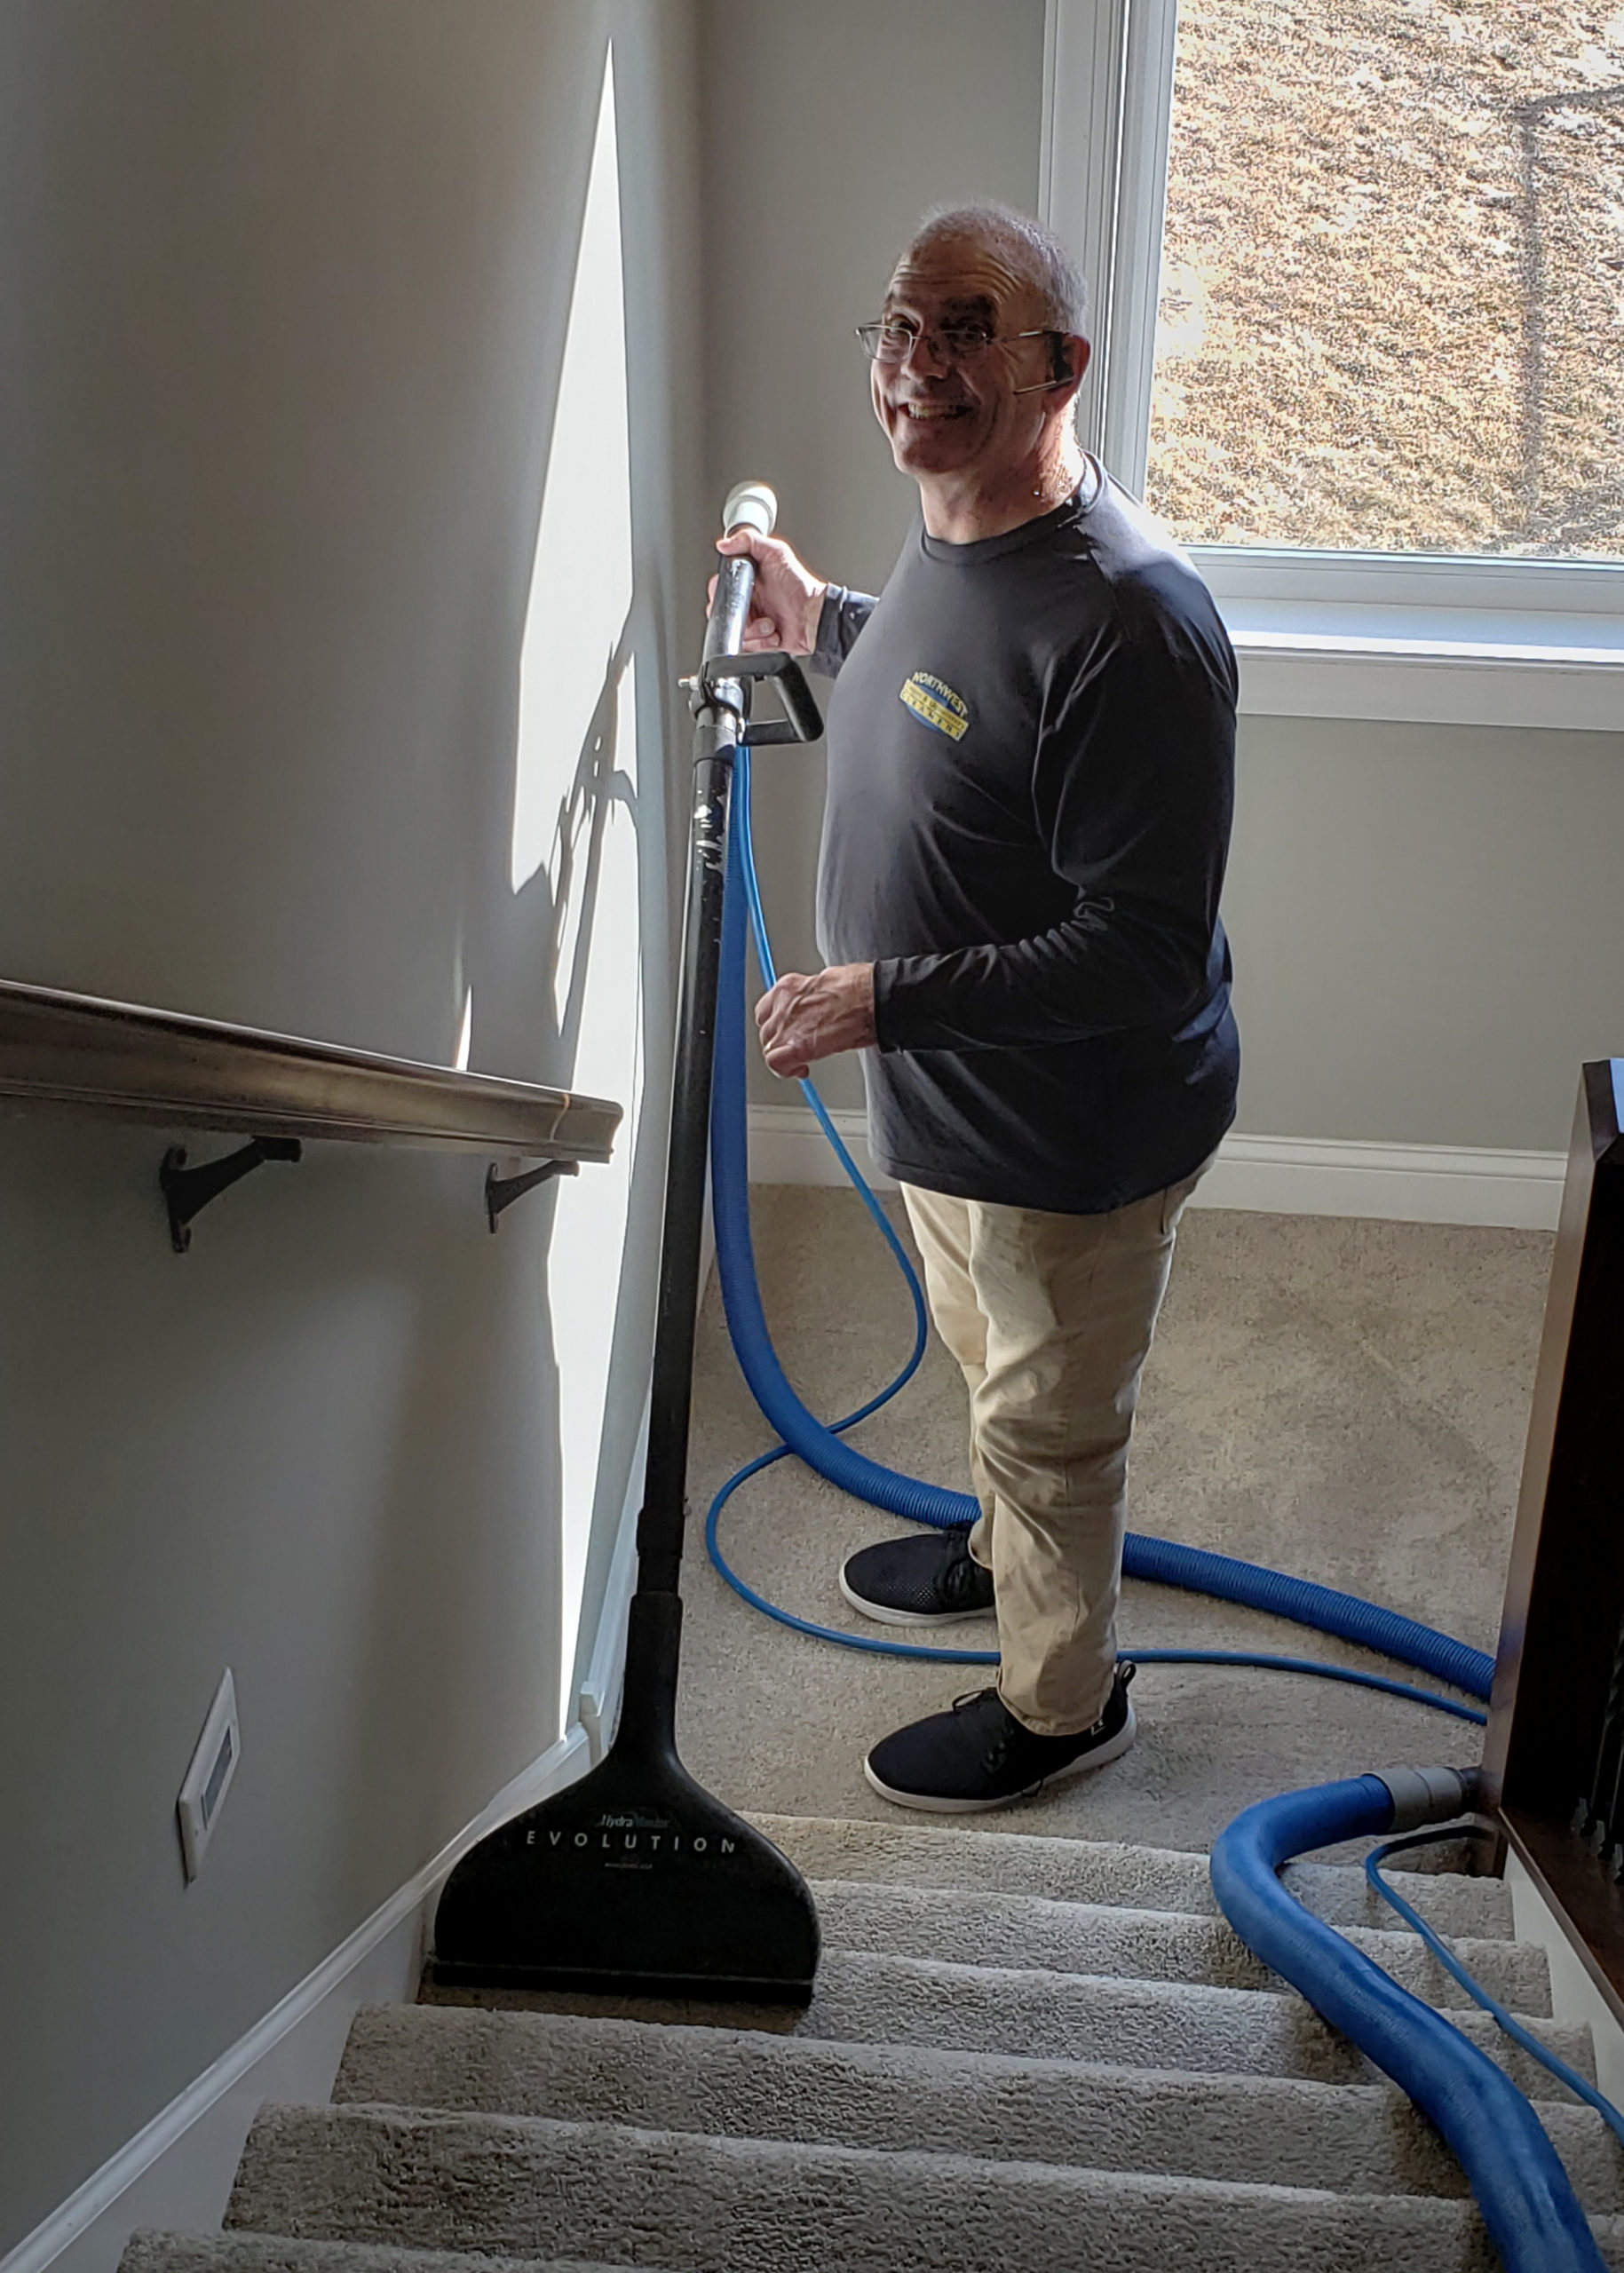 stair carpet cleaning - Northwest Carpet Cleaning - Minneapolis Minnesota